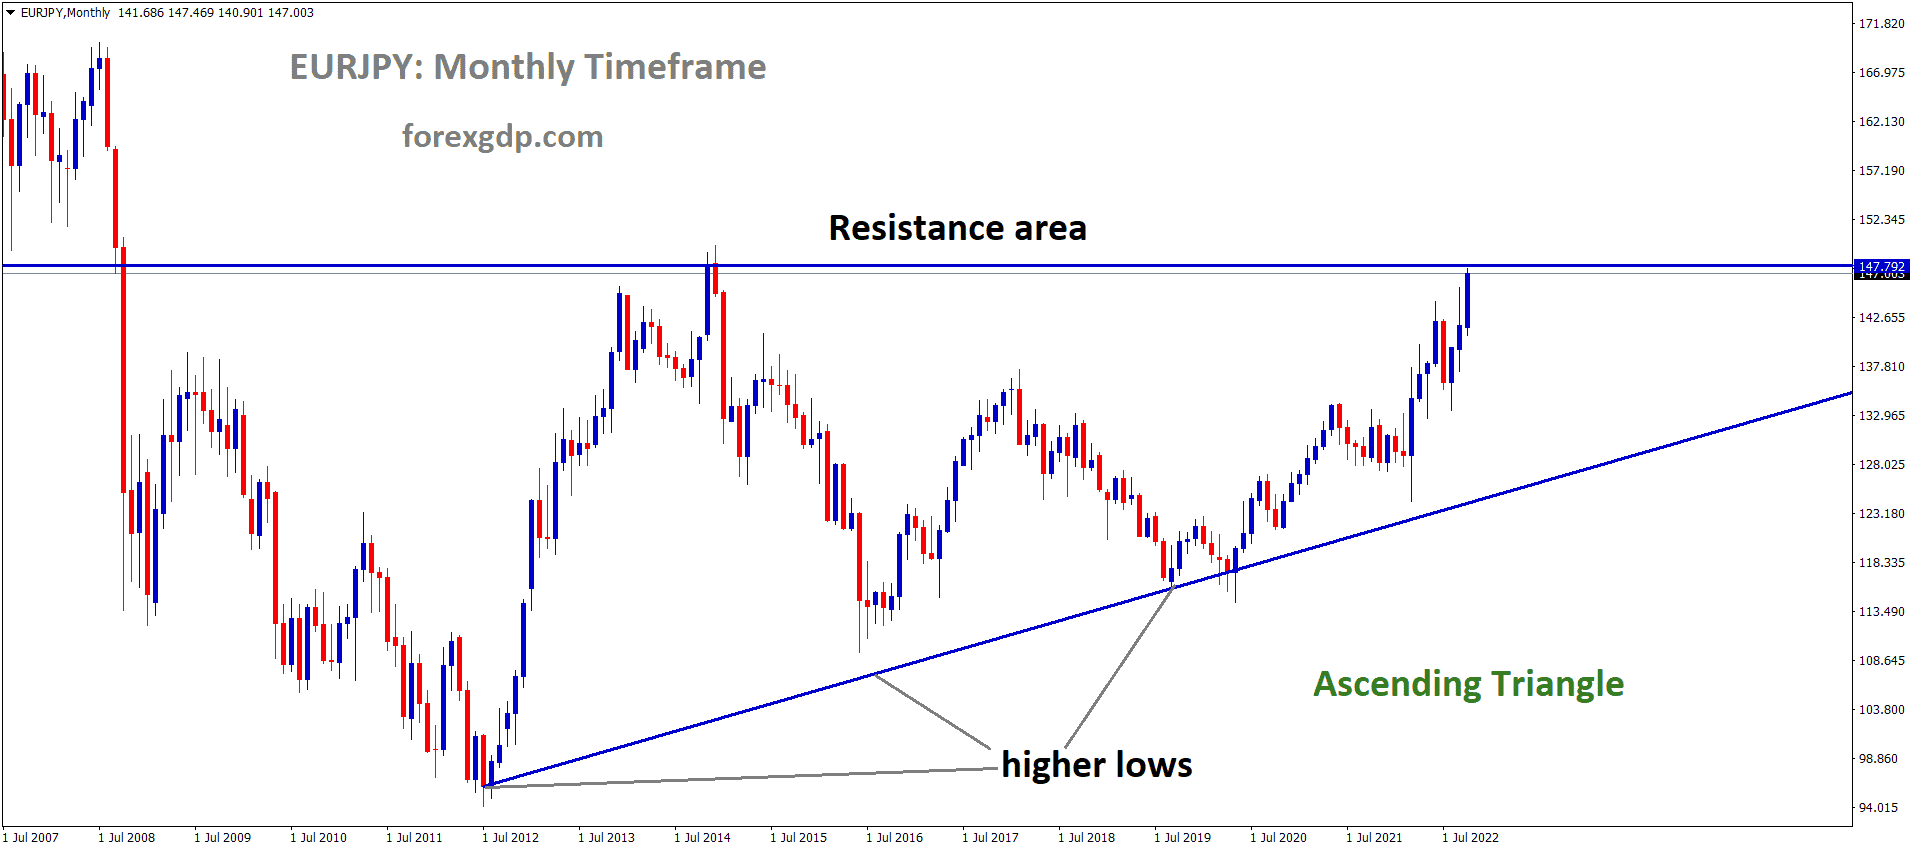 EURJPY is moving in an Ascending triangle pattern and the market has reached the resistance area of the pattern 2